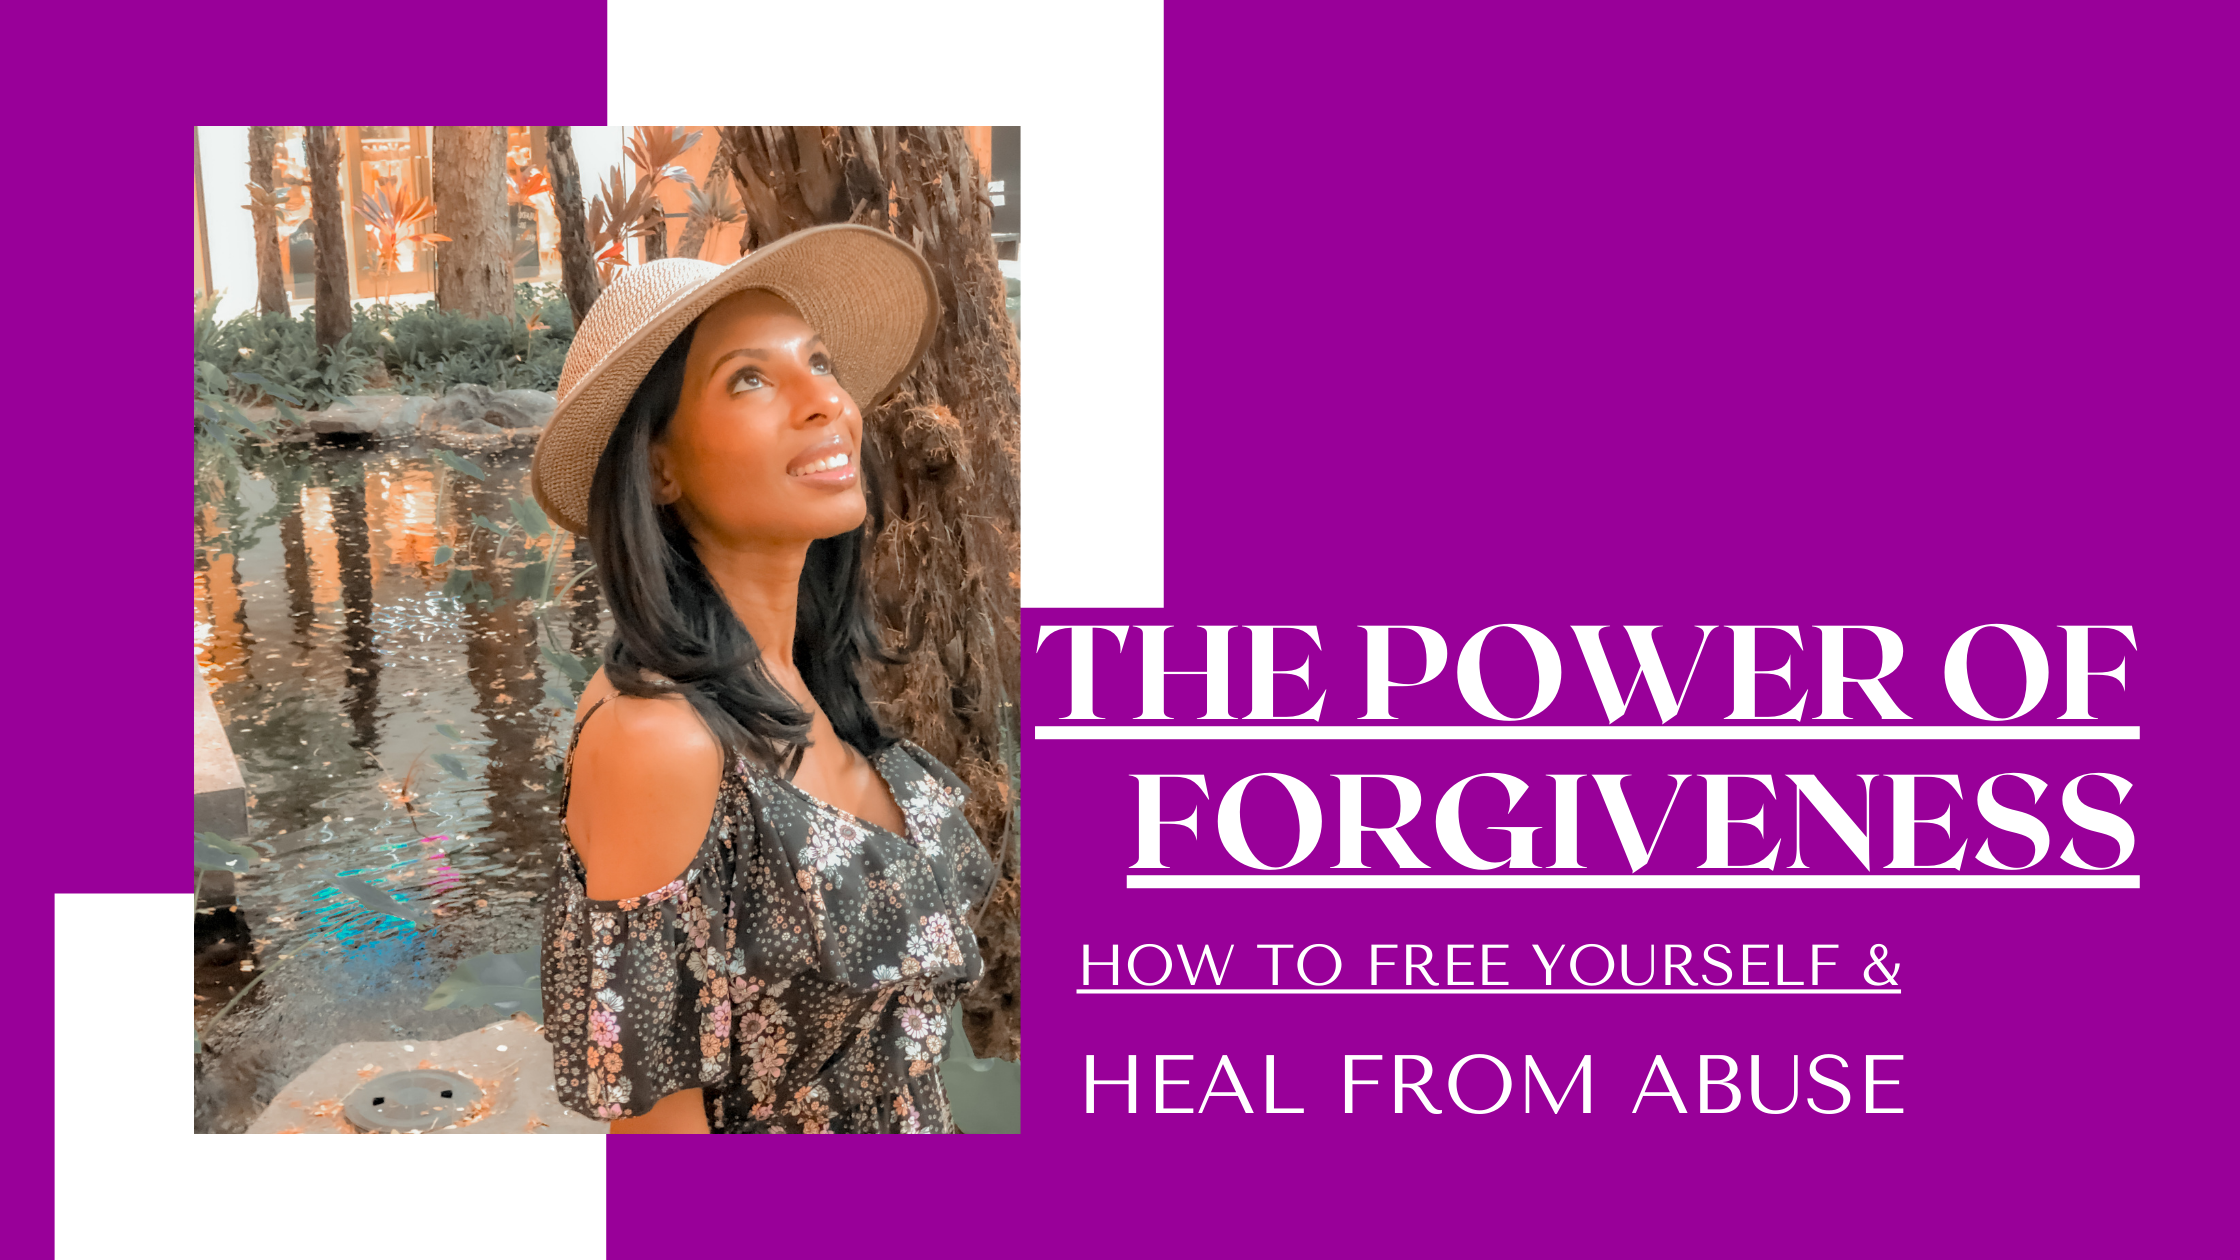 The Power of Forgiveness: How to Heal From Abuse